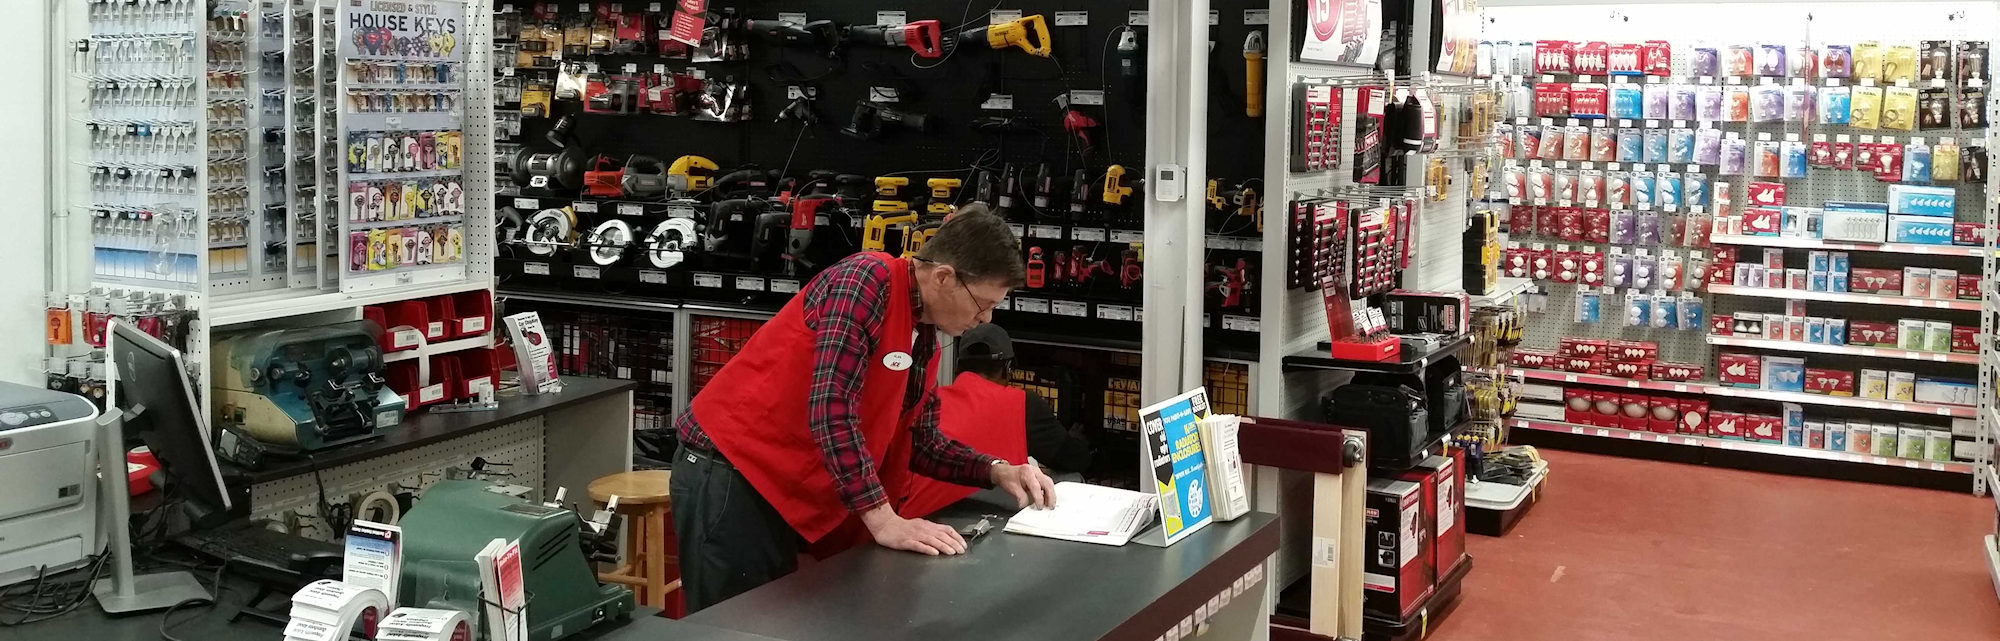 An focused and hardworking employee working from Annie's Dependable Service Hardware in Washington D.C.